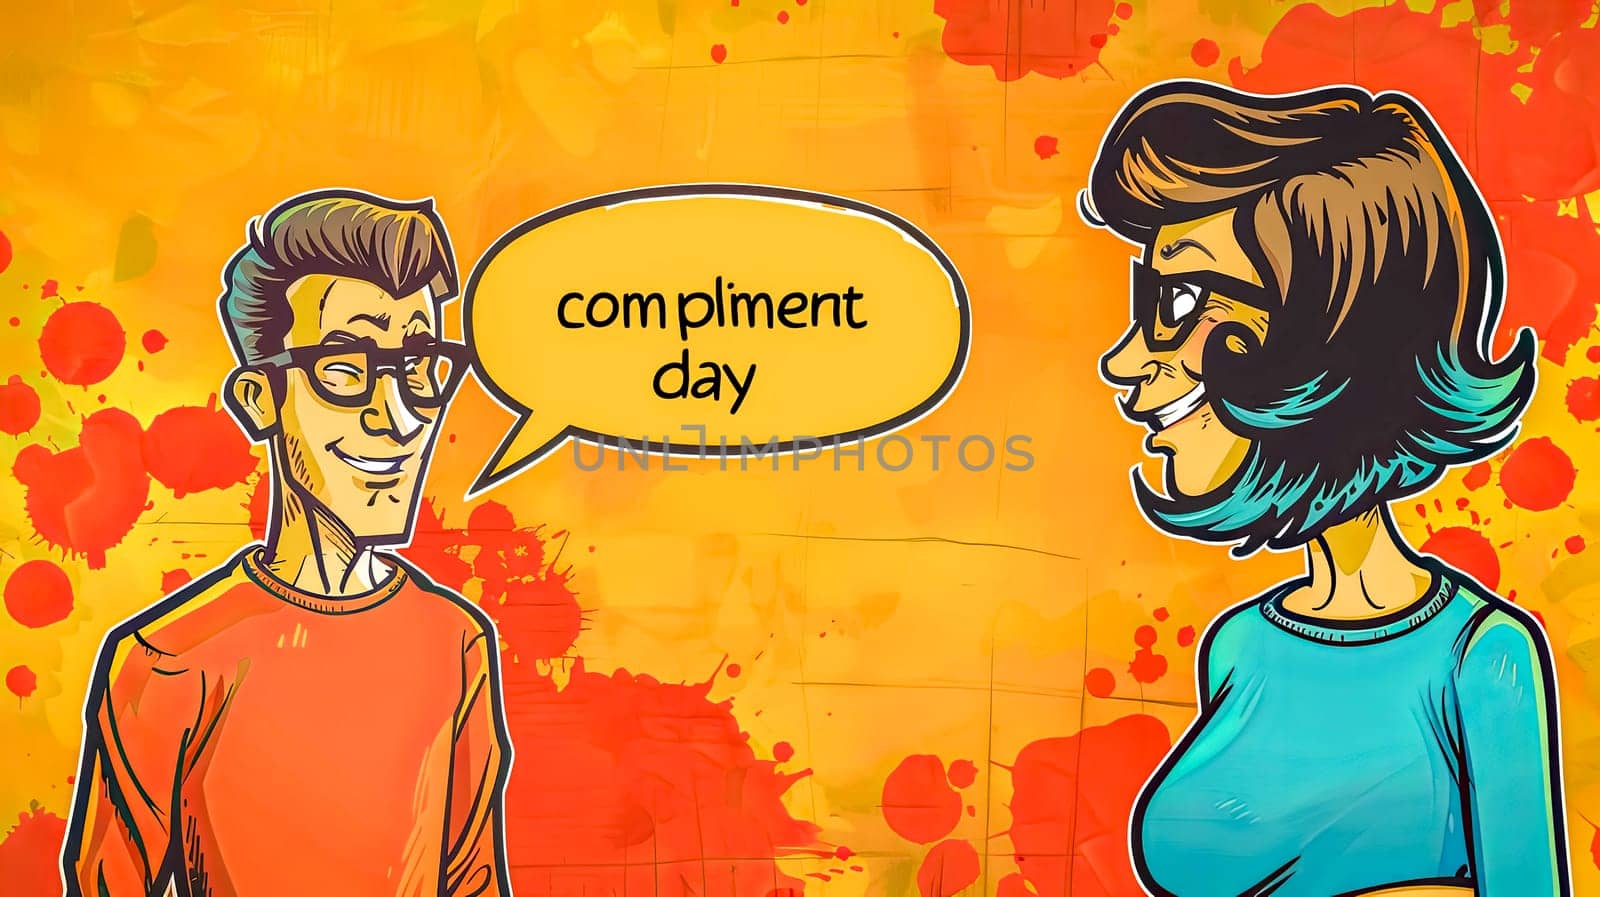 Illustration of two people exchanging compliments against a vibrant backdrop